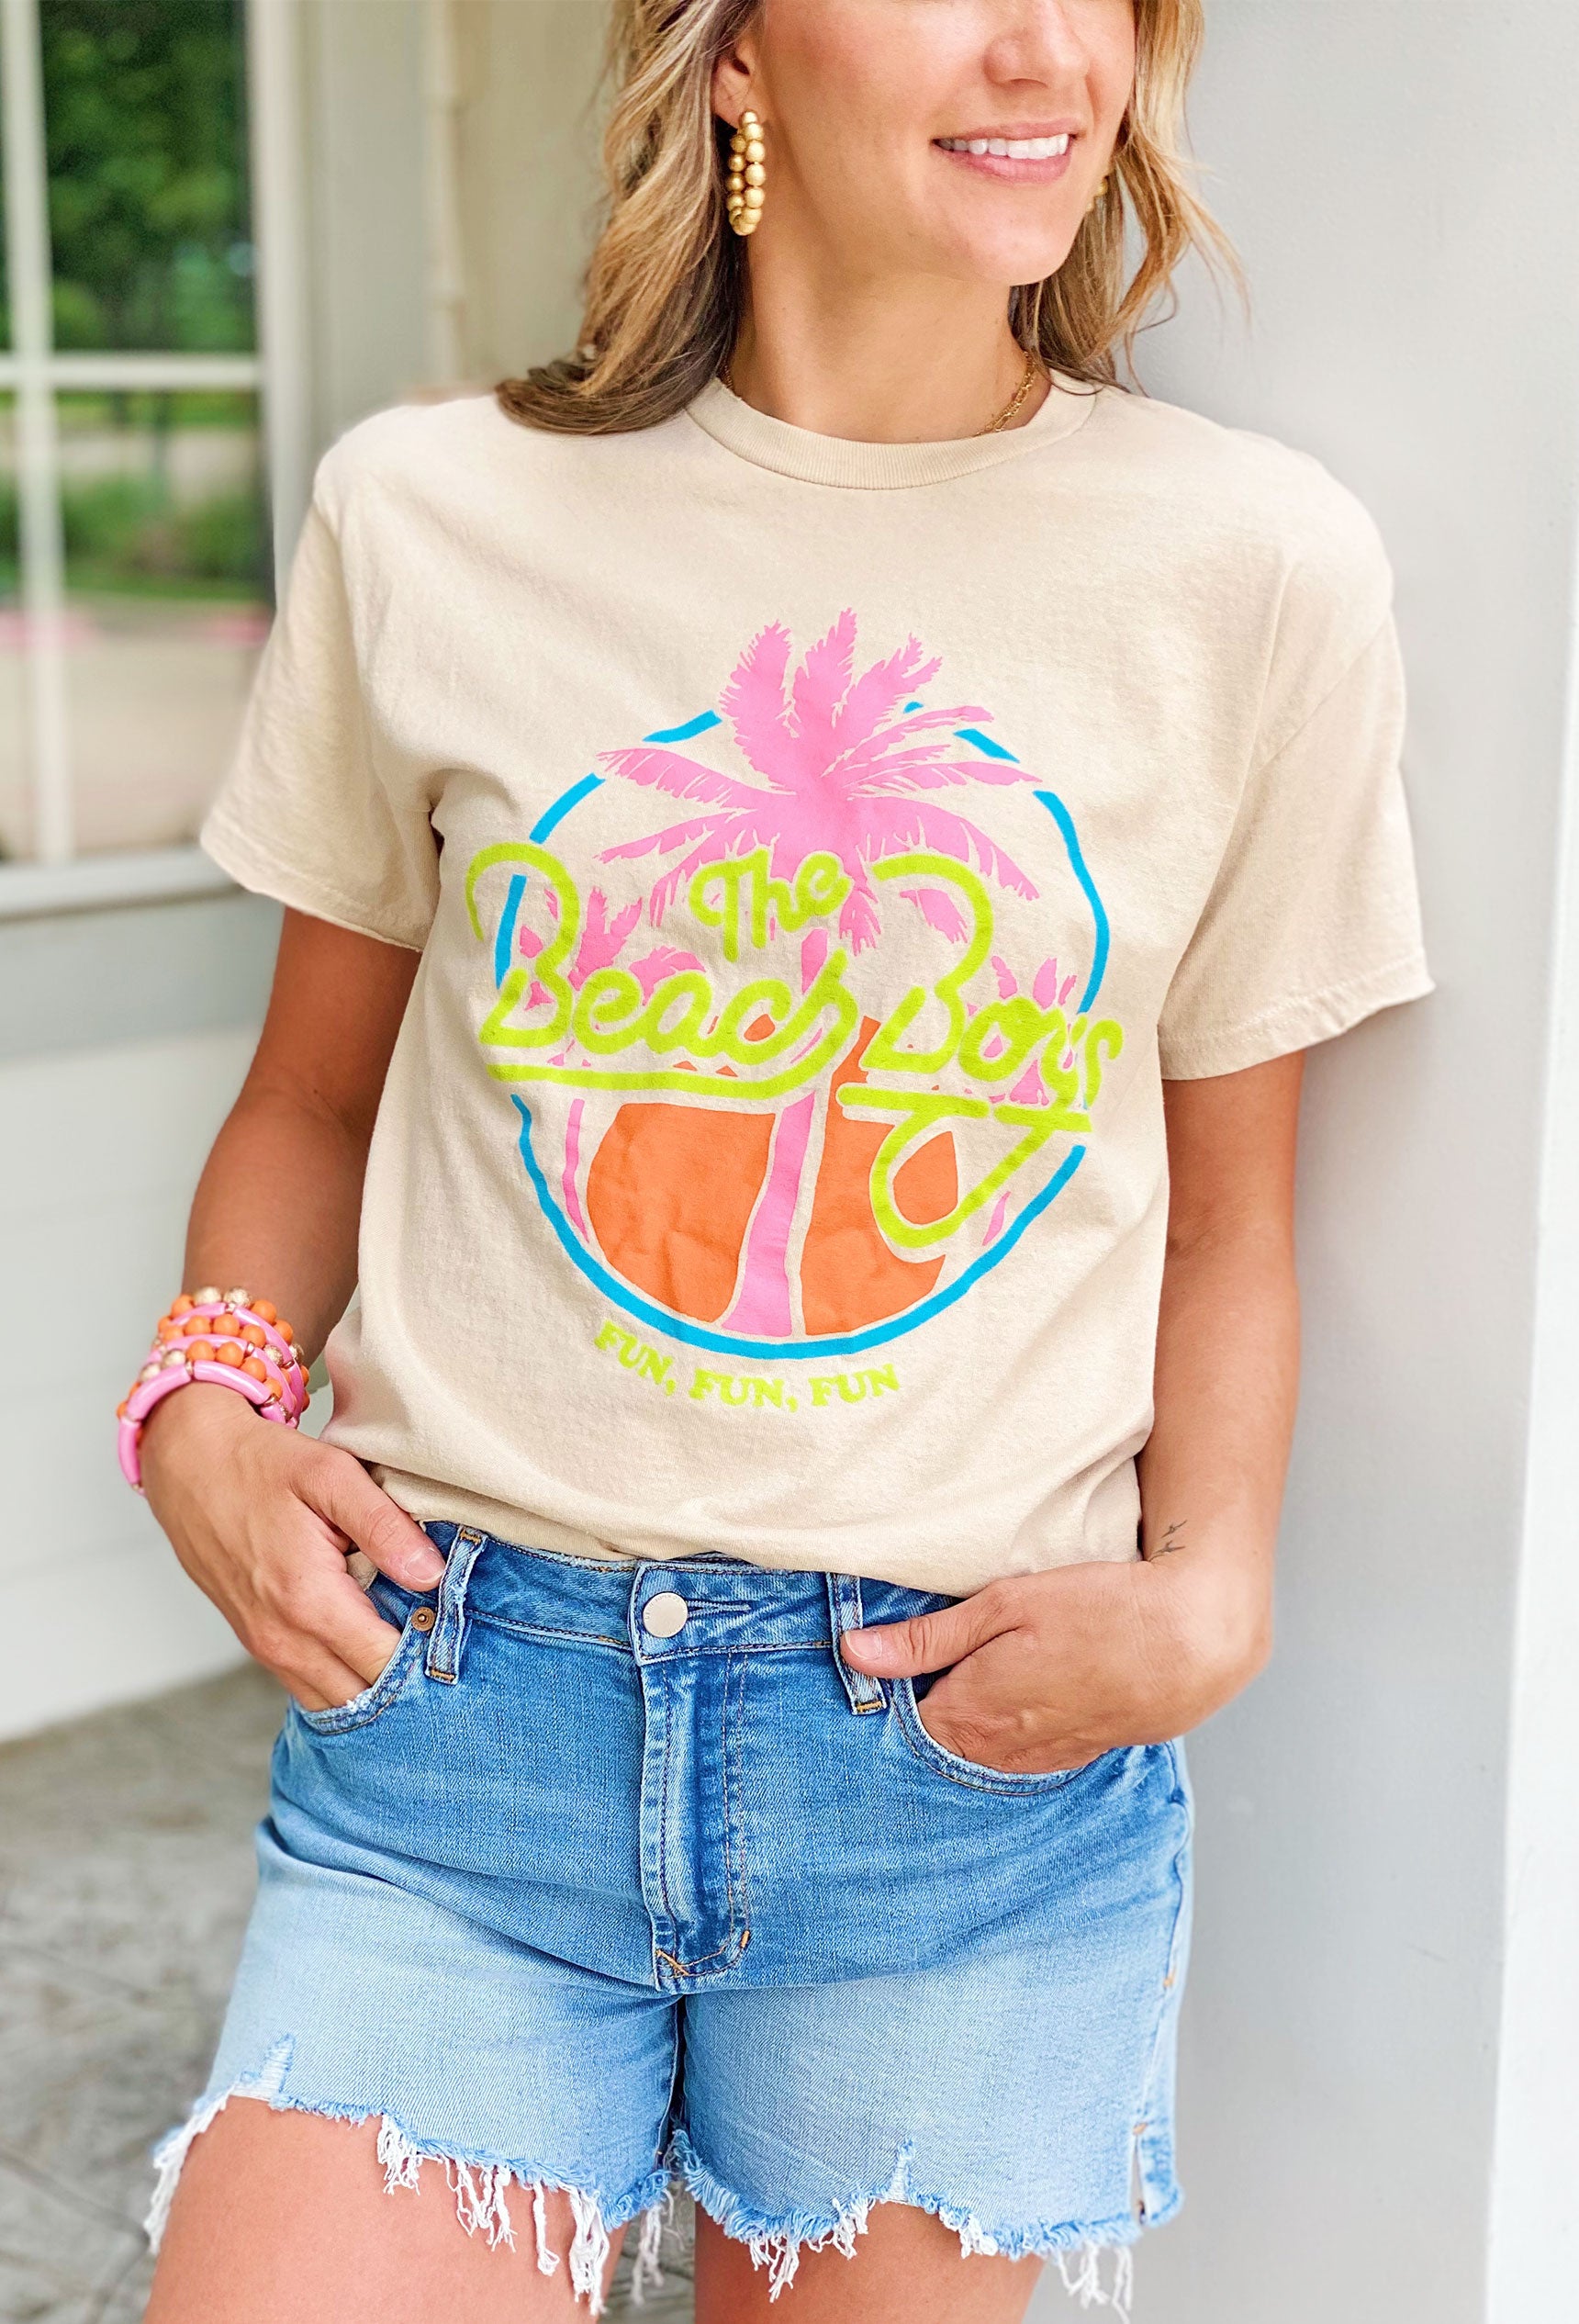 Neon Beach Boys Graphic Tee,  Neutral tee with a bold and bright neon design that reads "The Beach Boys" and a classic palm tree motif